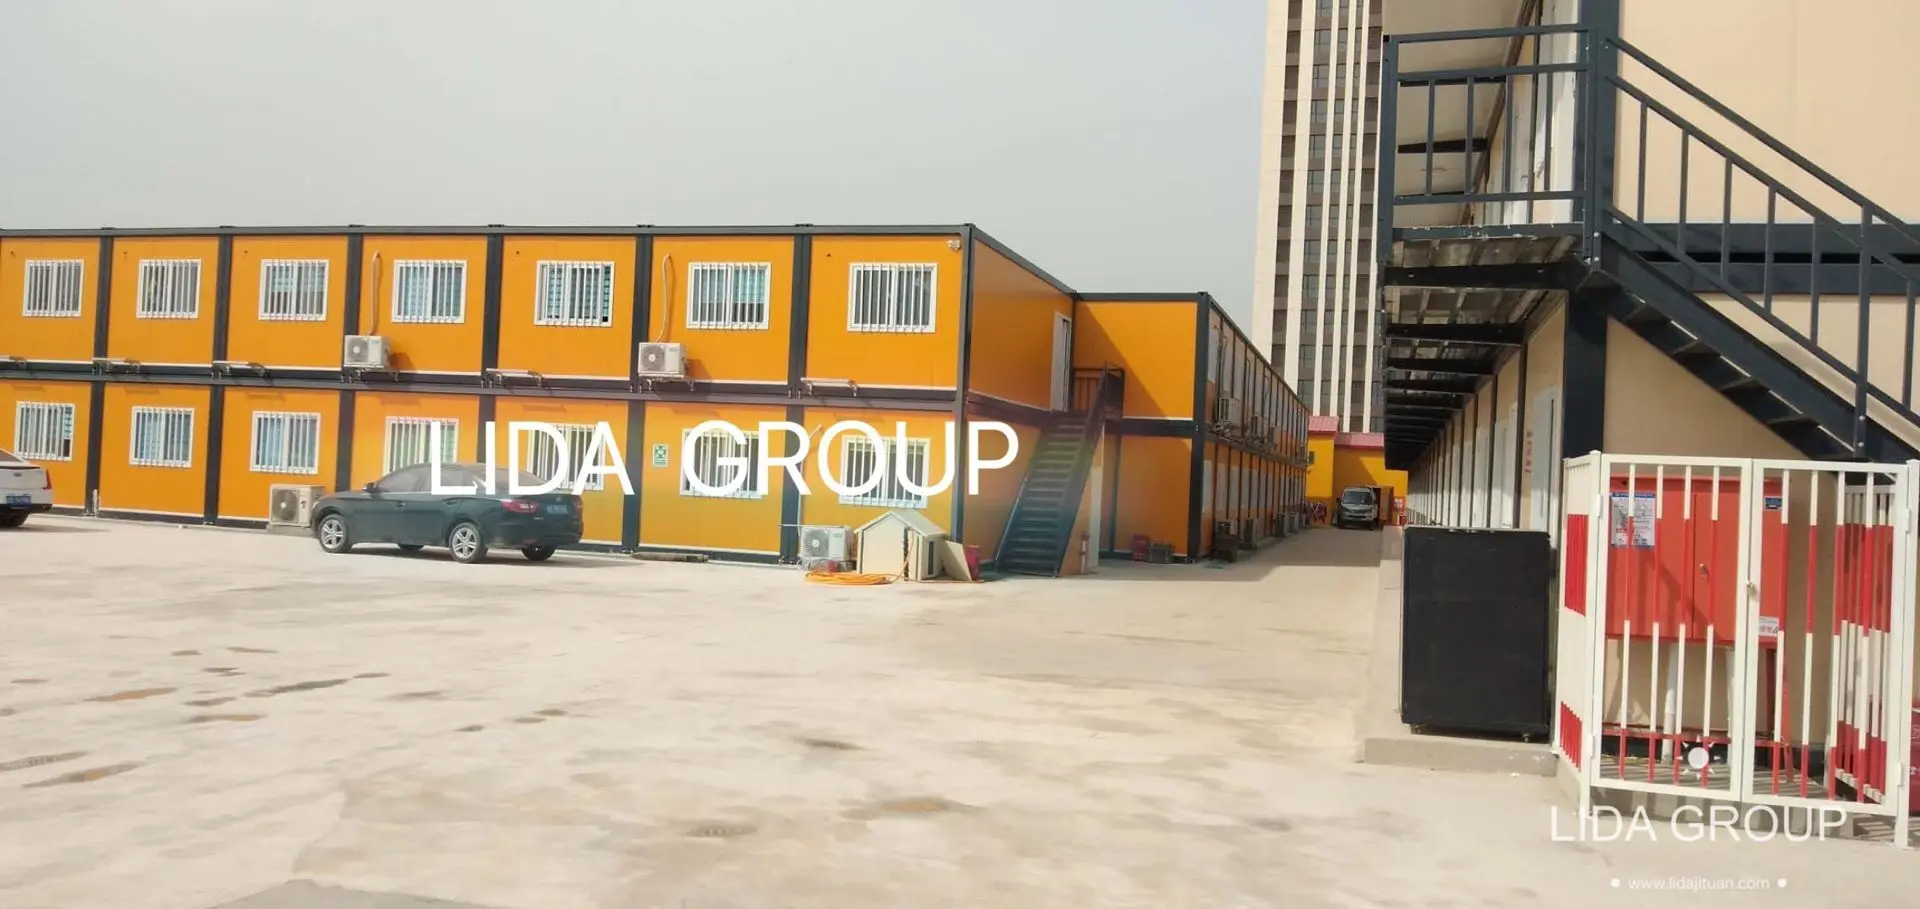 Lida Group New shipping container house inside Suppliers used as office, meeting room, dormitory, shop-7